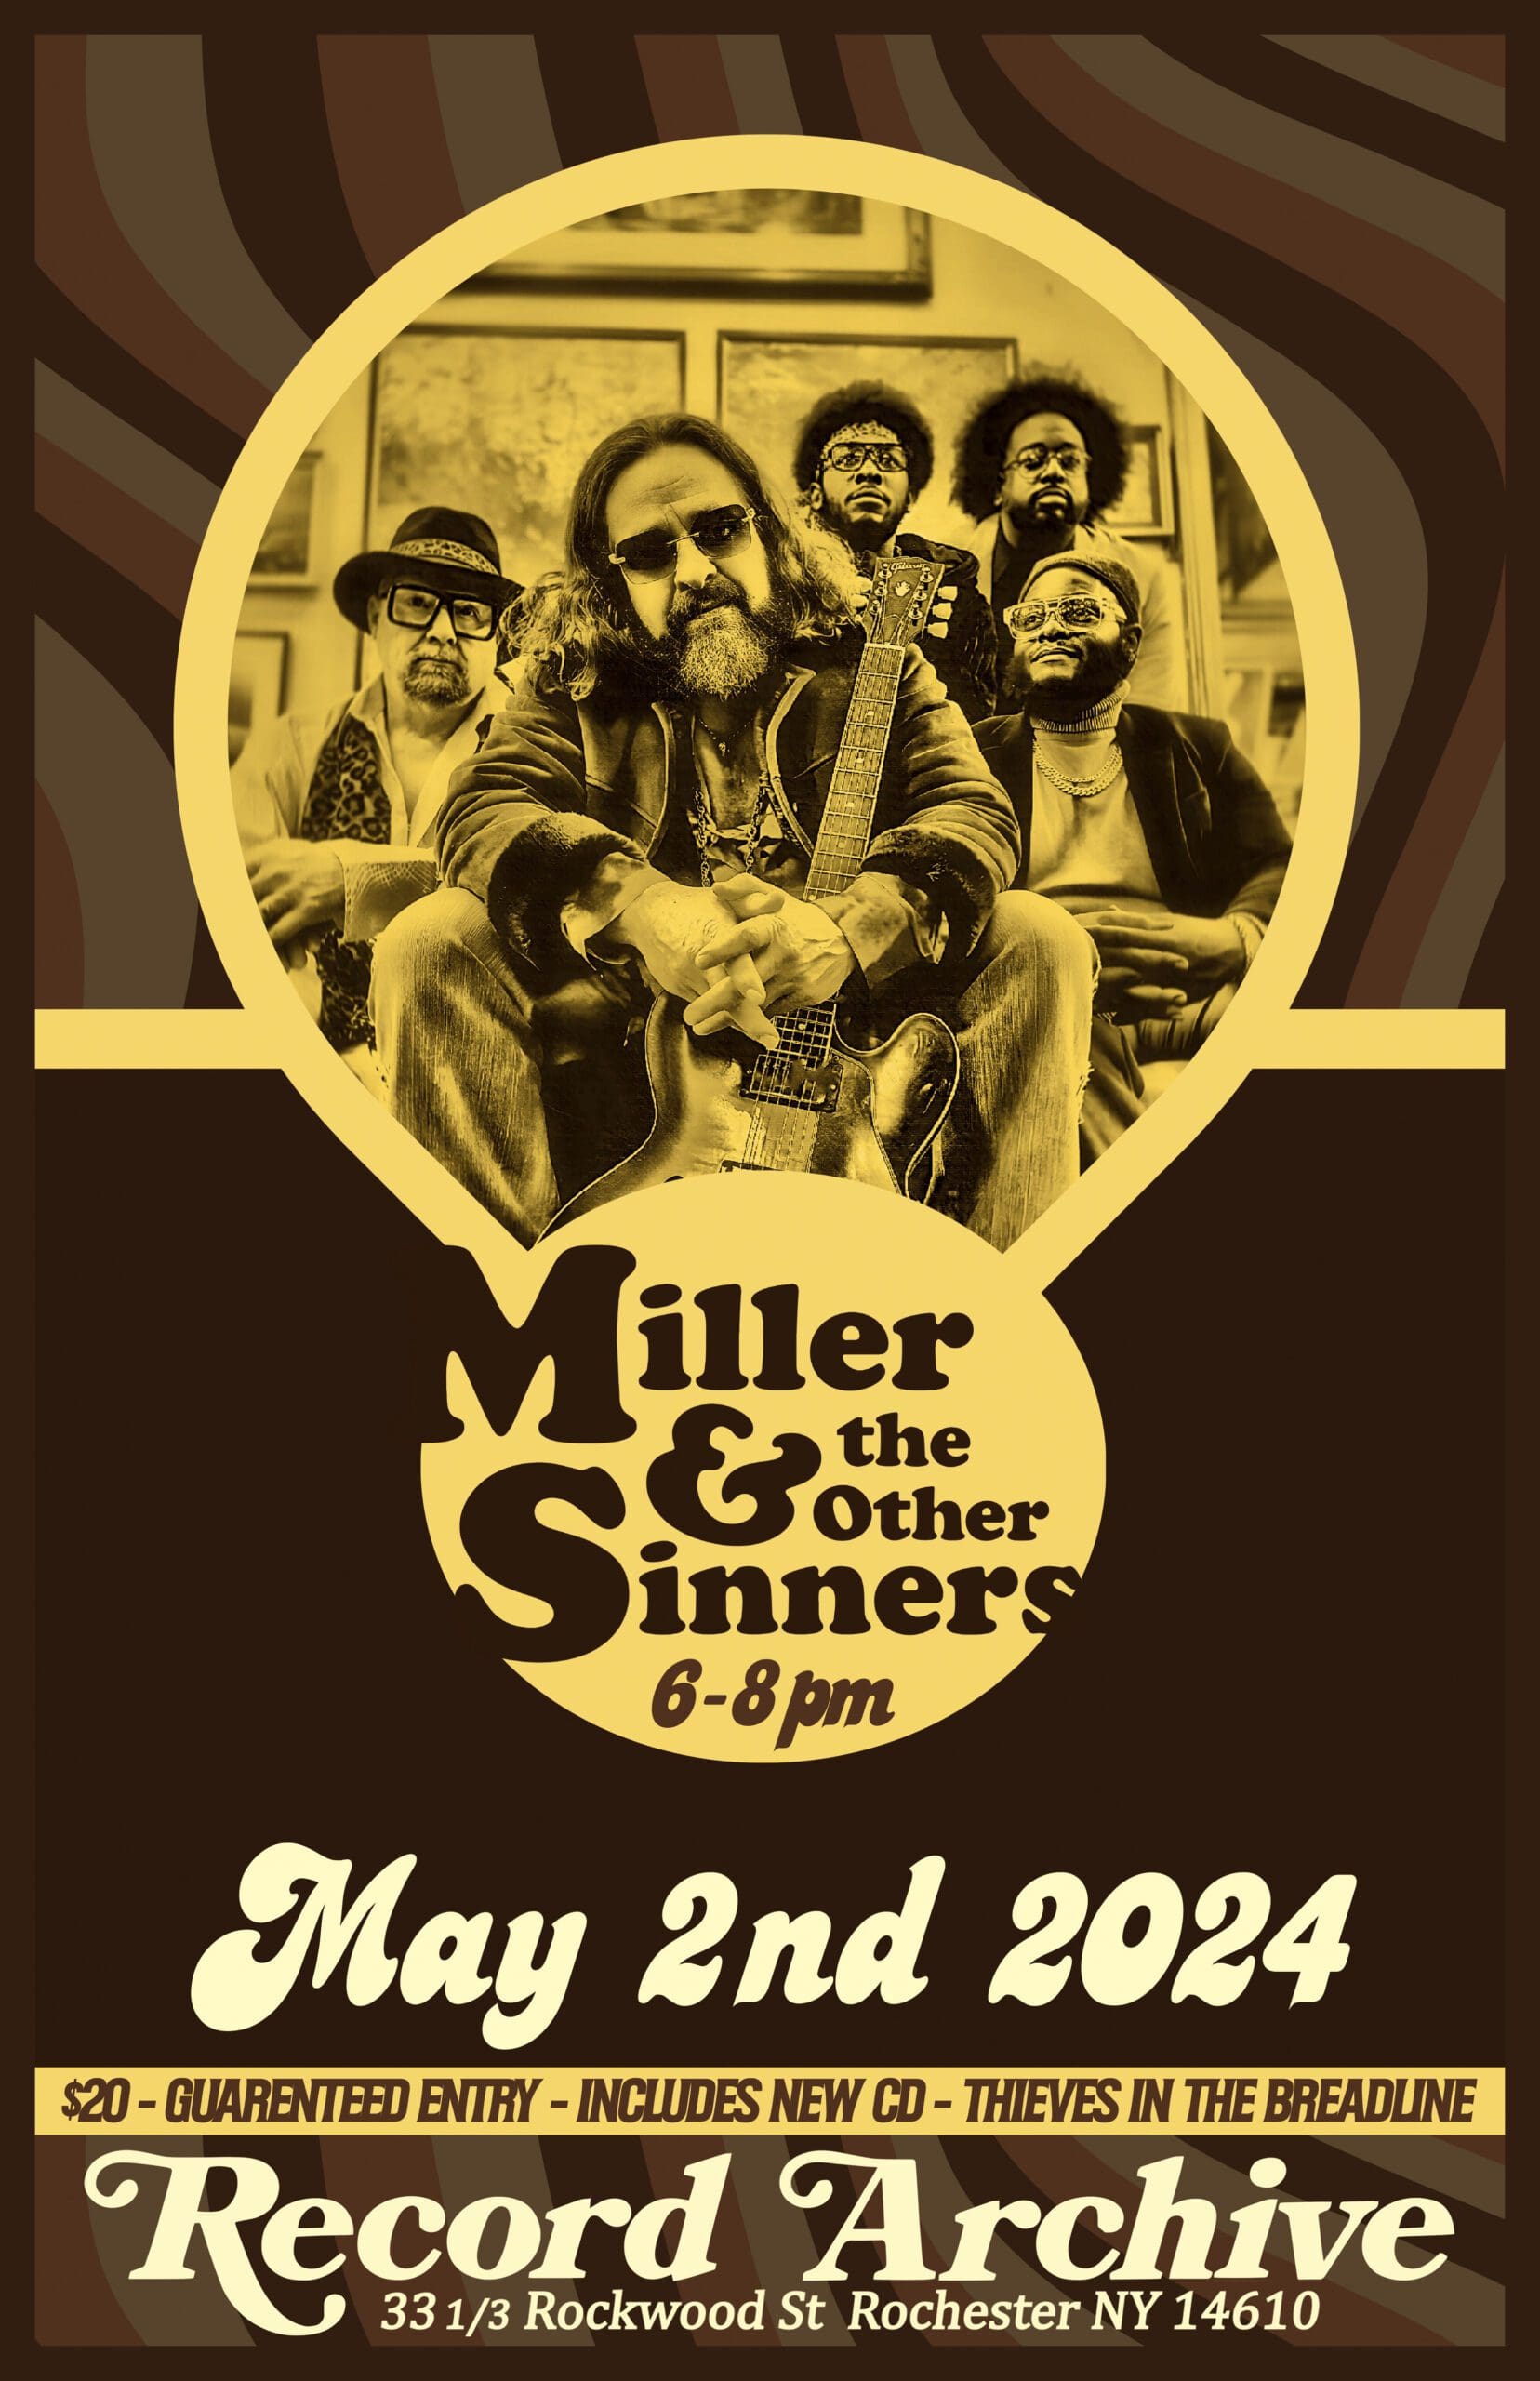 MILLER & THE OTHER SINNERS. MAY 2ND 2024. $20 GUARANTEED ENTRY. INCLUDES NEW CD. THIEVES IN THE BREADLINE.